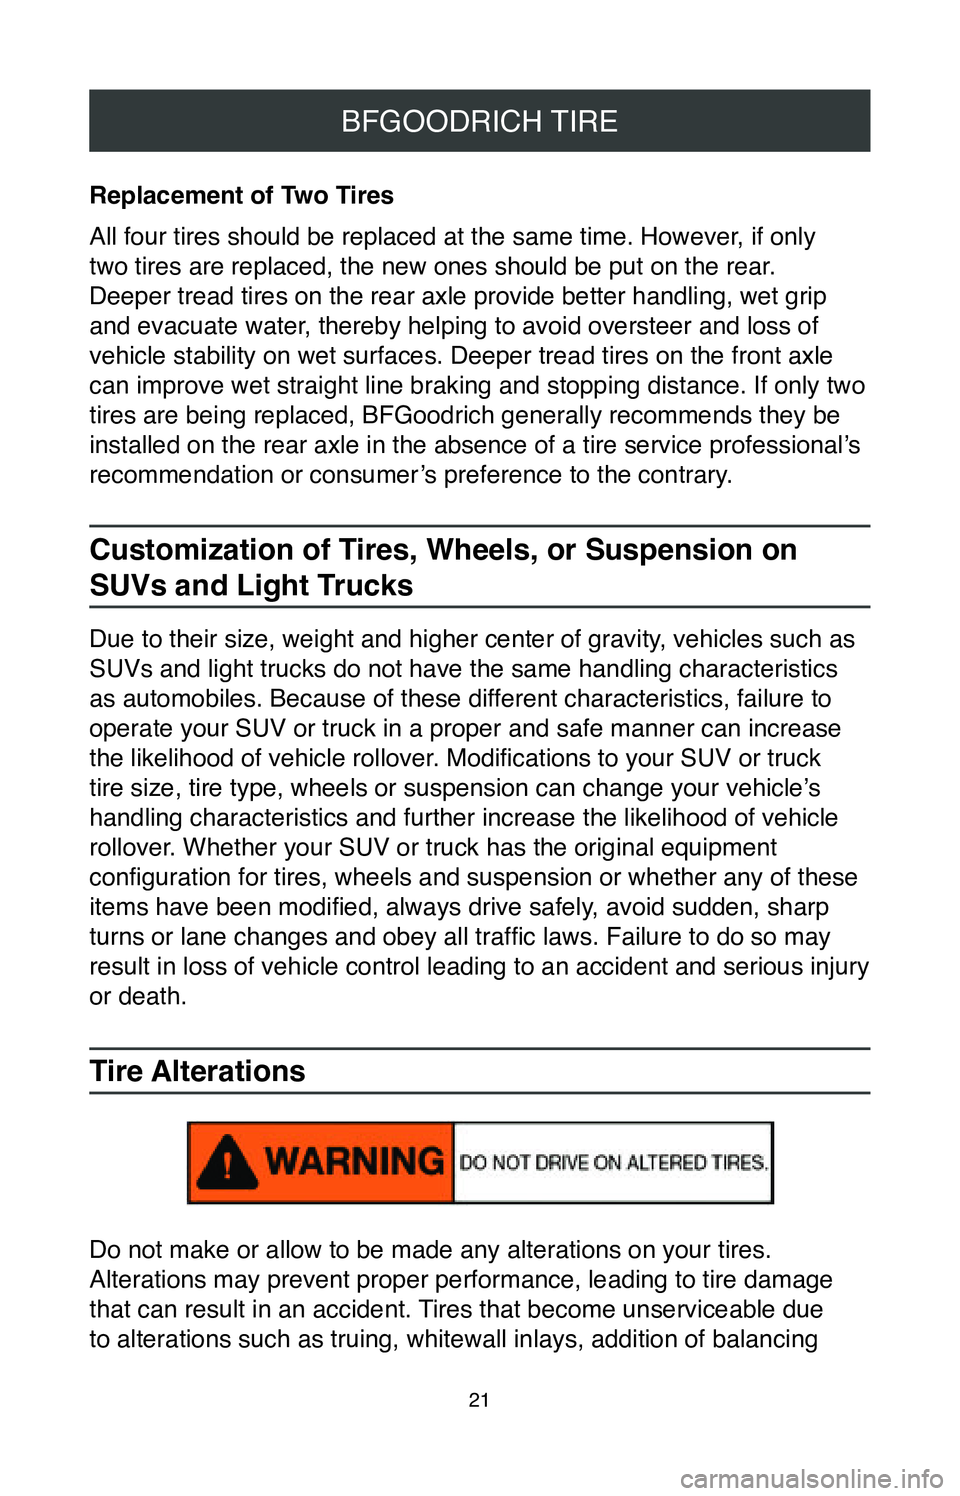 TOYOTA TUNDRA 2020  Warranties & Maintenance Guides (in English) 21
BFGOODRICH TIRE
Replacement of Two Tires
All four tires should be replaced at the same time. However, if only 
two tires are replaced, the new ones should be put on the rear. 
Deeper tread tires on